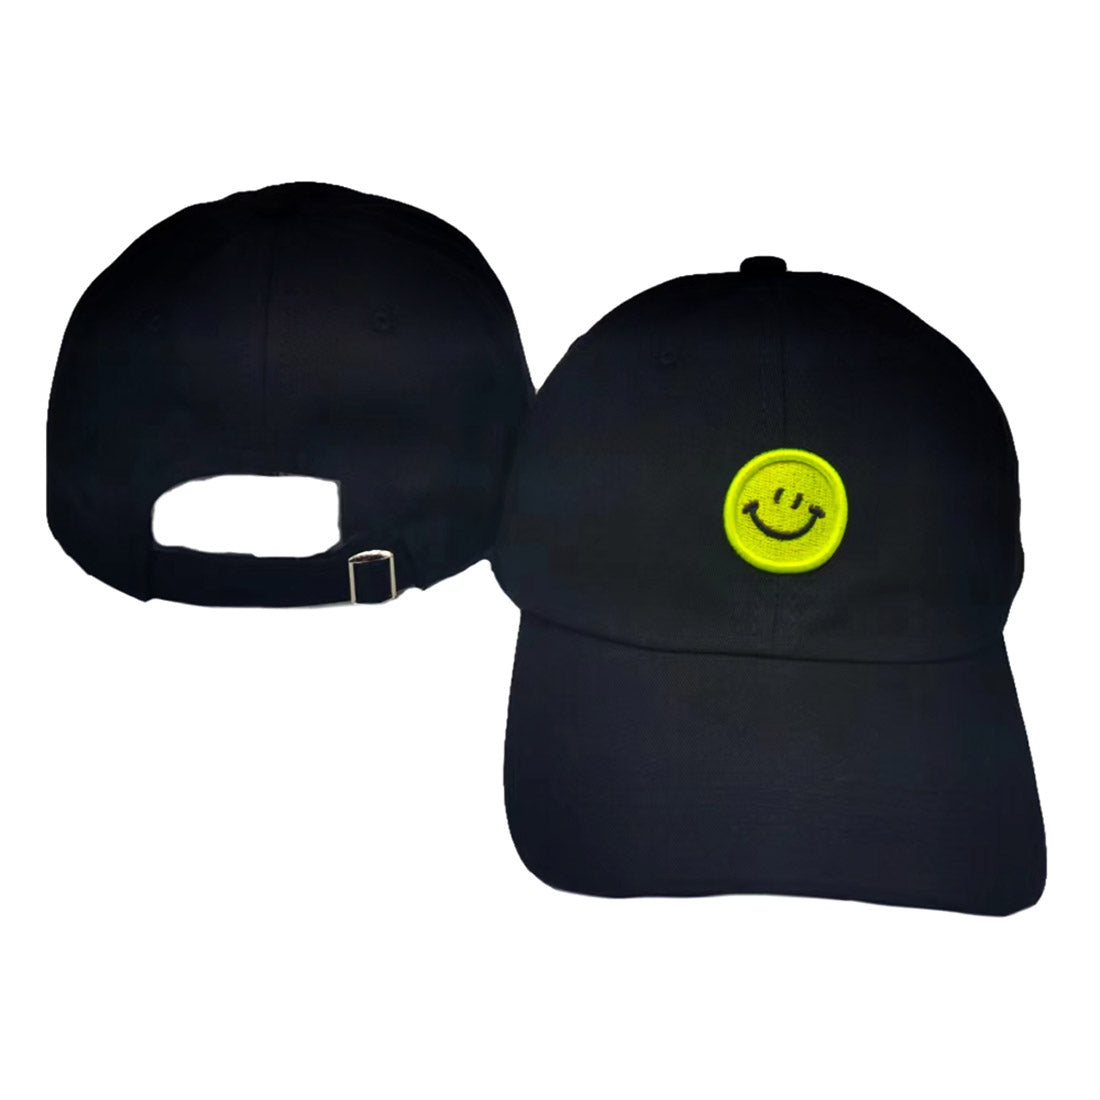 Ready for action in the sunshine, this Smile Accented Solid Baseball Cap will keep you cool like a cucumber! Keep the sun off your face and your style on point with this sturdy and adjustable cotton cap! Get your sunny day swag on with this rockin' headgear! Perfect Birthday gift, Anniversary, Valentine's Day gift.